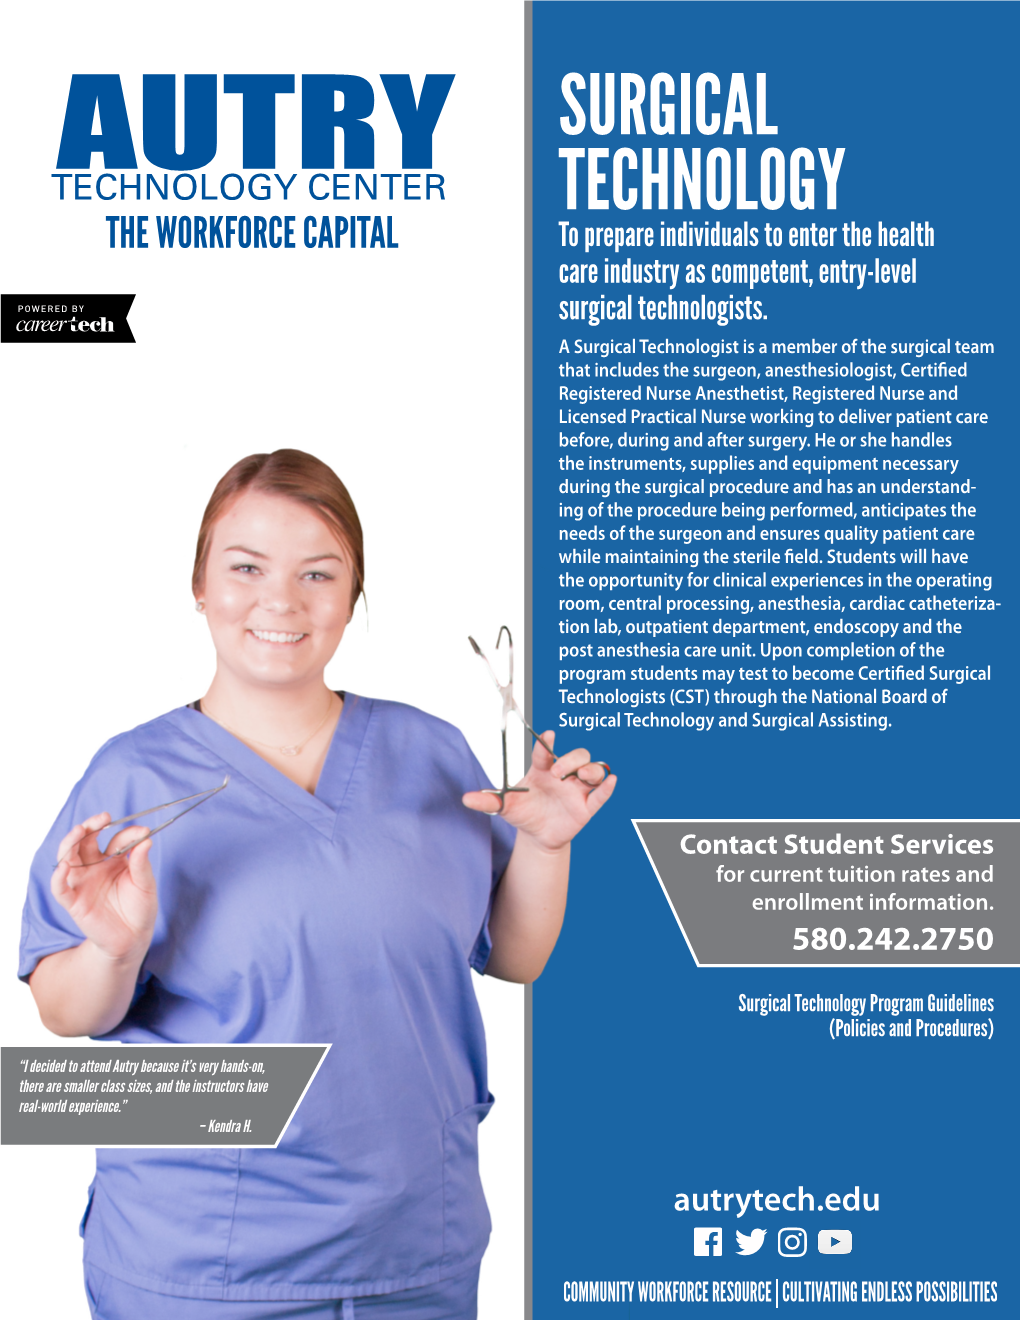 SURGICAL TECHNOLOGY the WORKFORCE CAPITAL to Prepare Individuals to Enter the Health Care Industry As Competent, Entry-Level Surgical Technologists